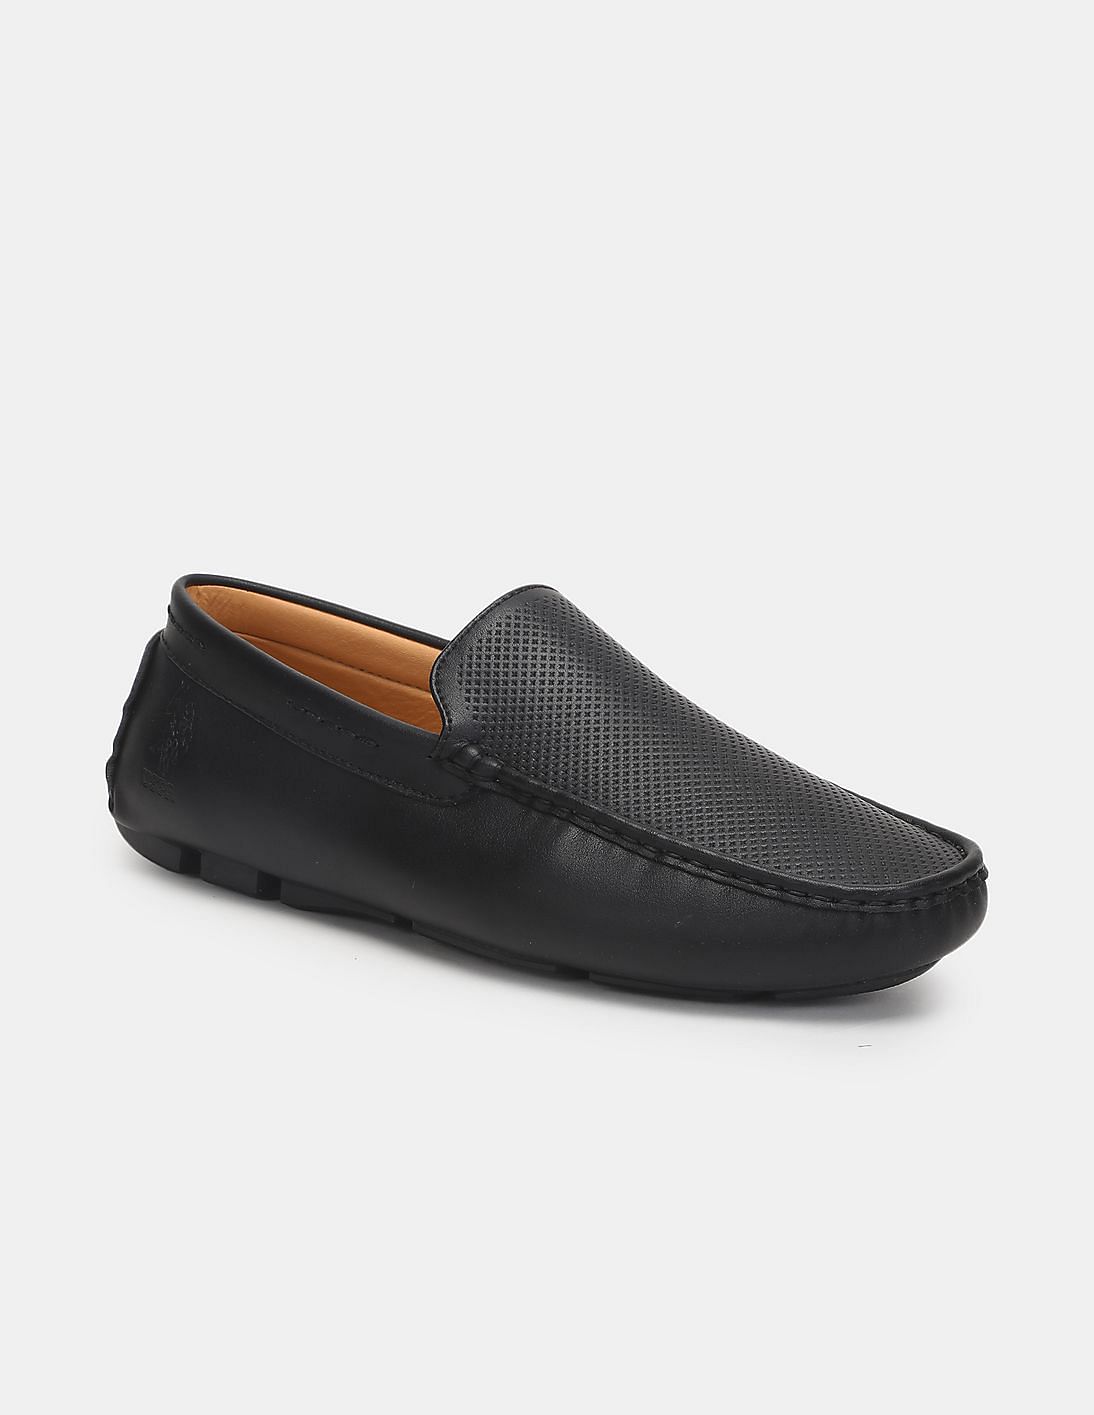 Buy U.S. Polo Assn. Square Toe Textured Marjan Loafers - NNNOW.com